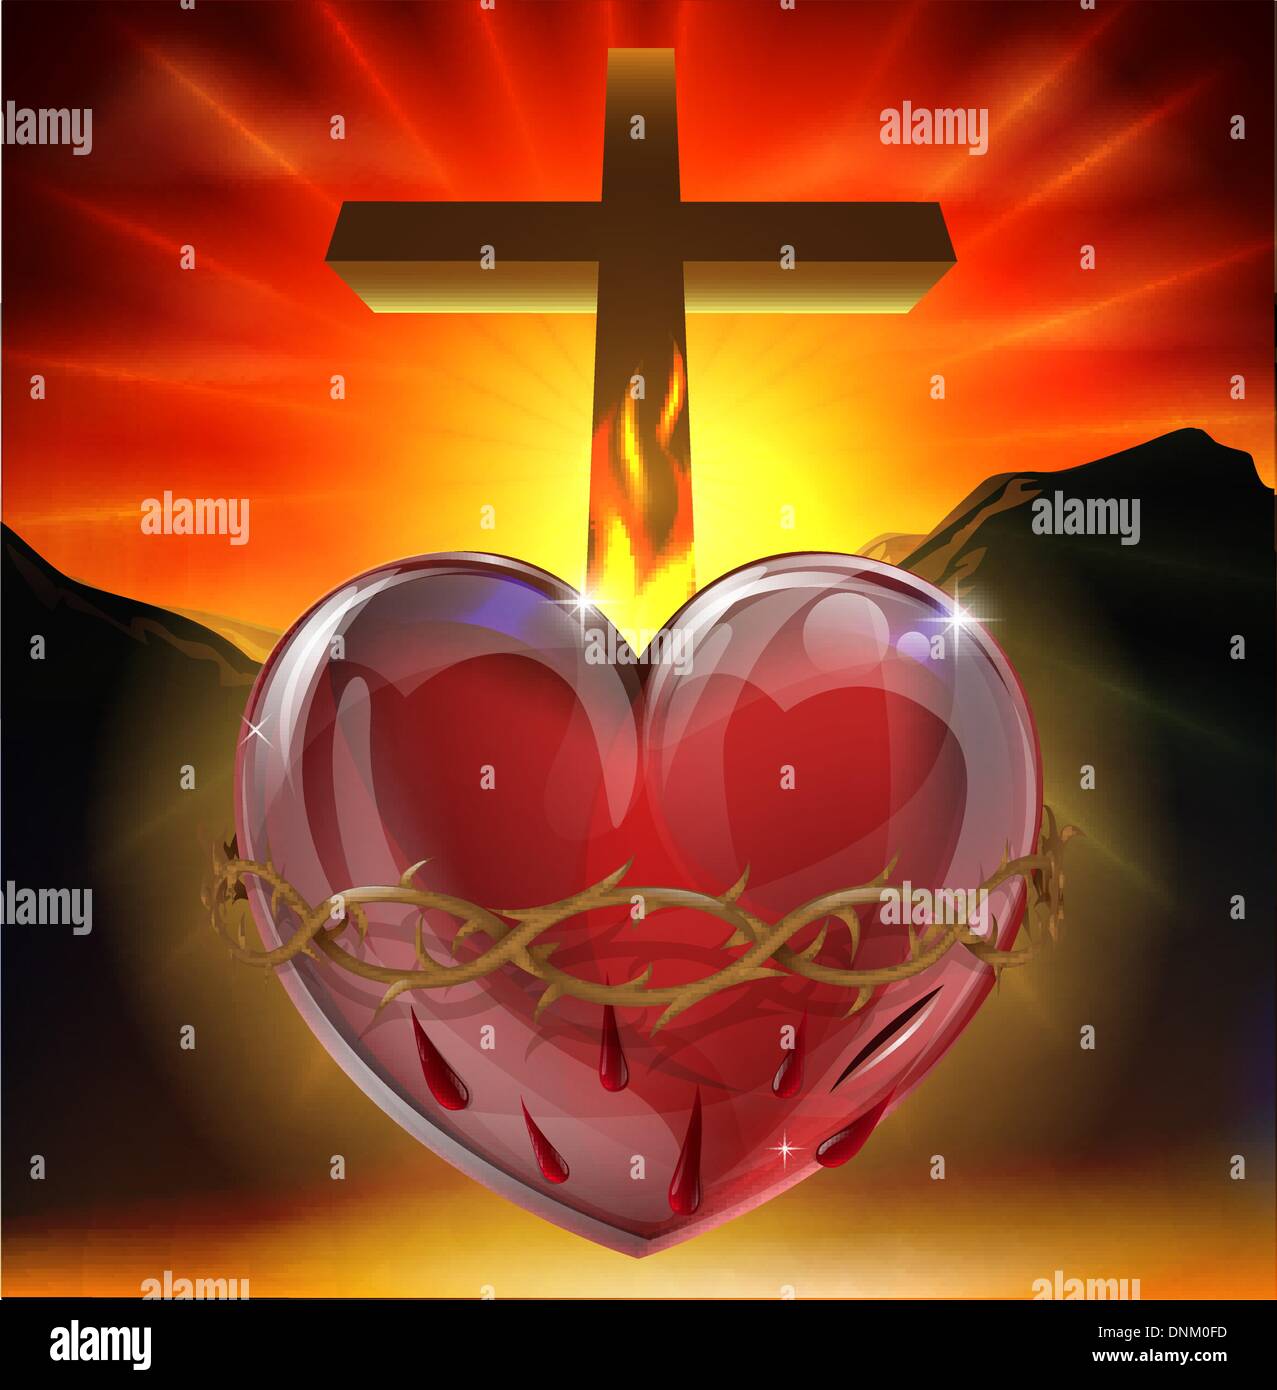 Illustration of the Christian symbol of the sacred heart. A heart shining with divine light with crown of thorns,  lance wound a Stock Vector